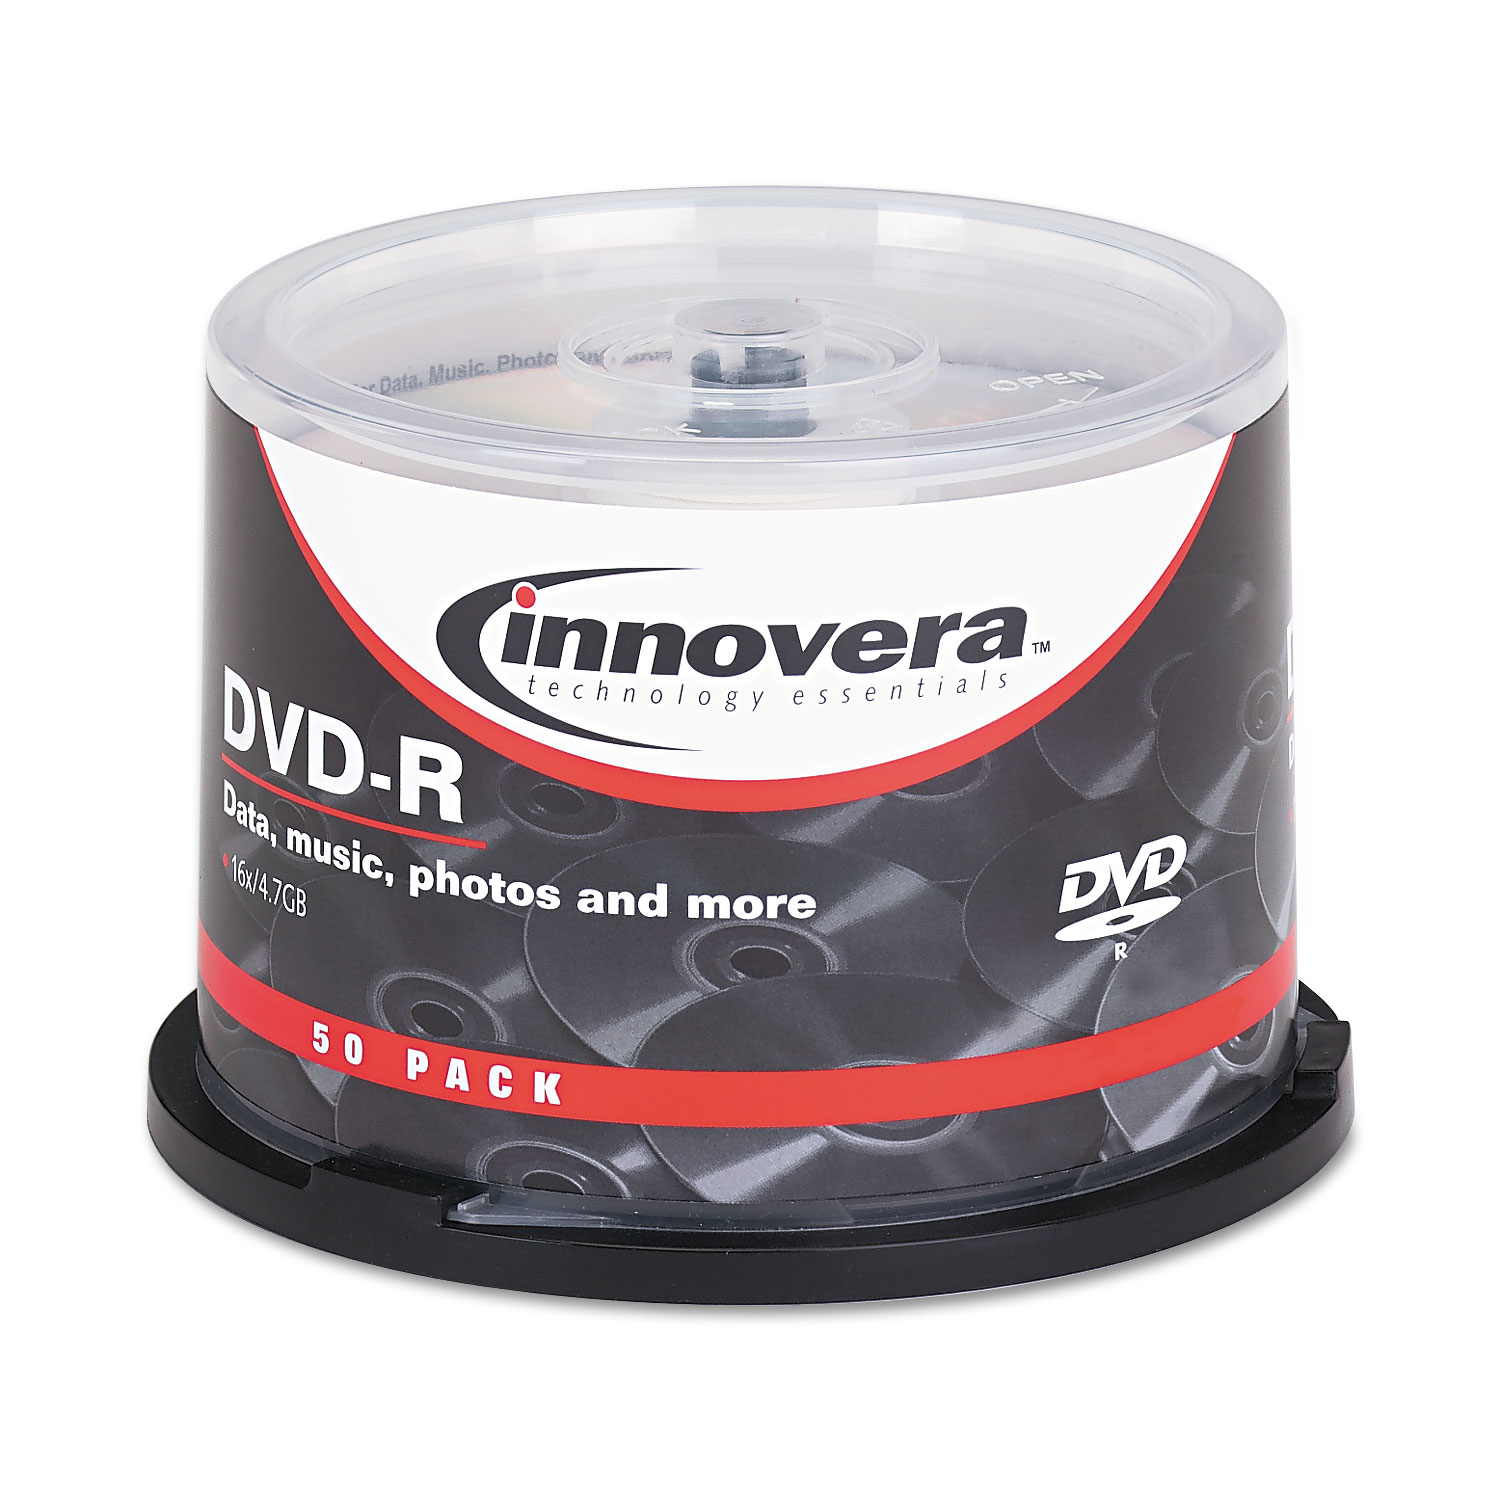  Innovera IVR46850 DVD-R Discs, 4.7GB, 16x, Spindle, Silver, 50/Pack (IVR46850) 